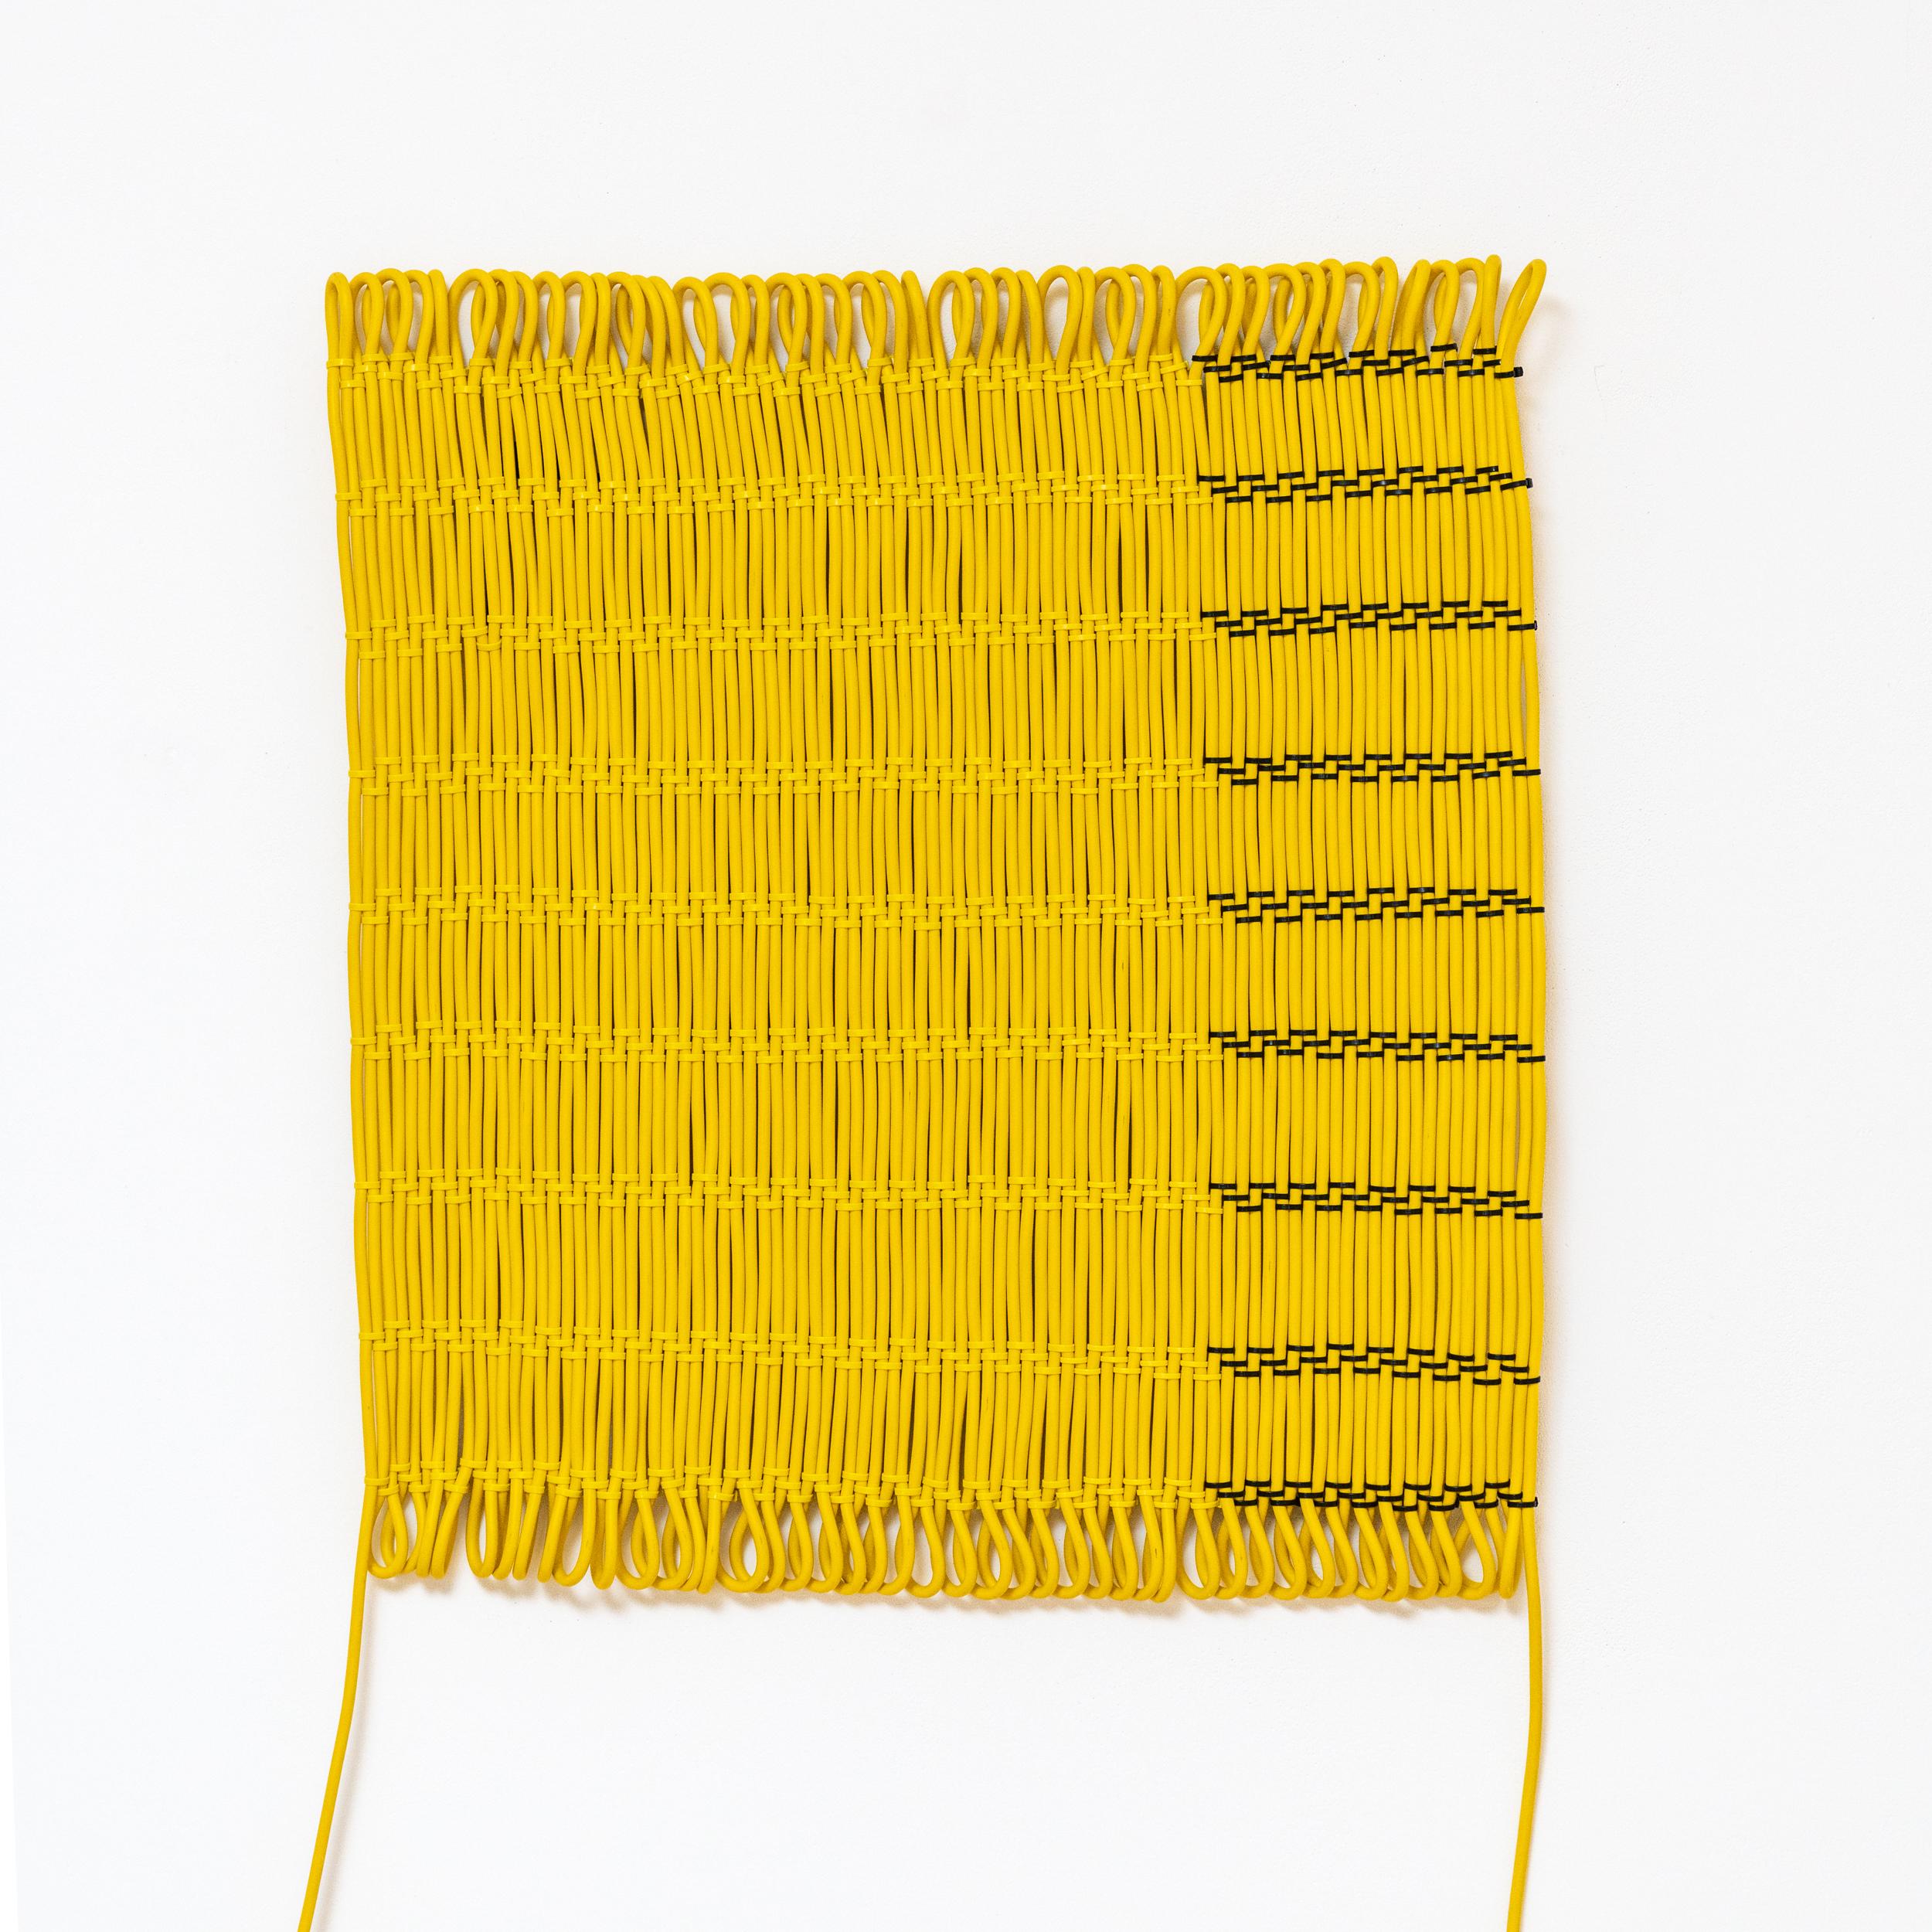 100 Meter Cable Wall rug / tapestry
Dimensions: W 79 x L 102 cm or W 64 x L 130 cm (˜ 0.83 m2 surface).
Materials: PVC electricity cable, cable clips, country specific plug and socket.
Available cable colours: black, yellow, orange, blue.

Cable